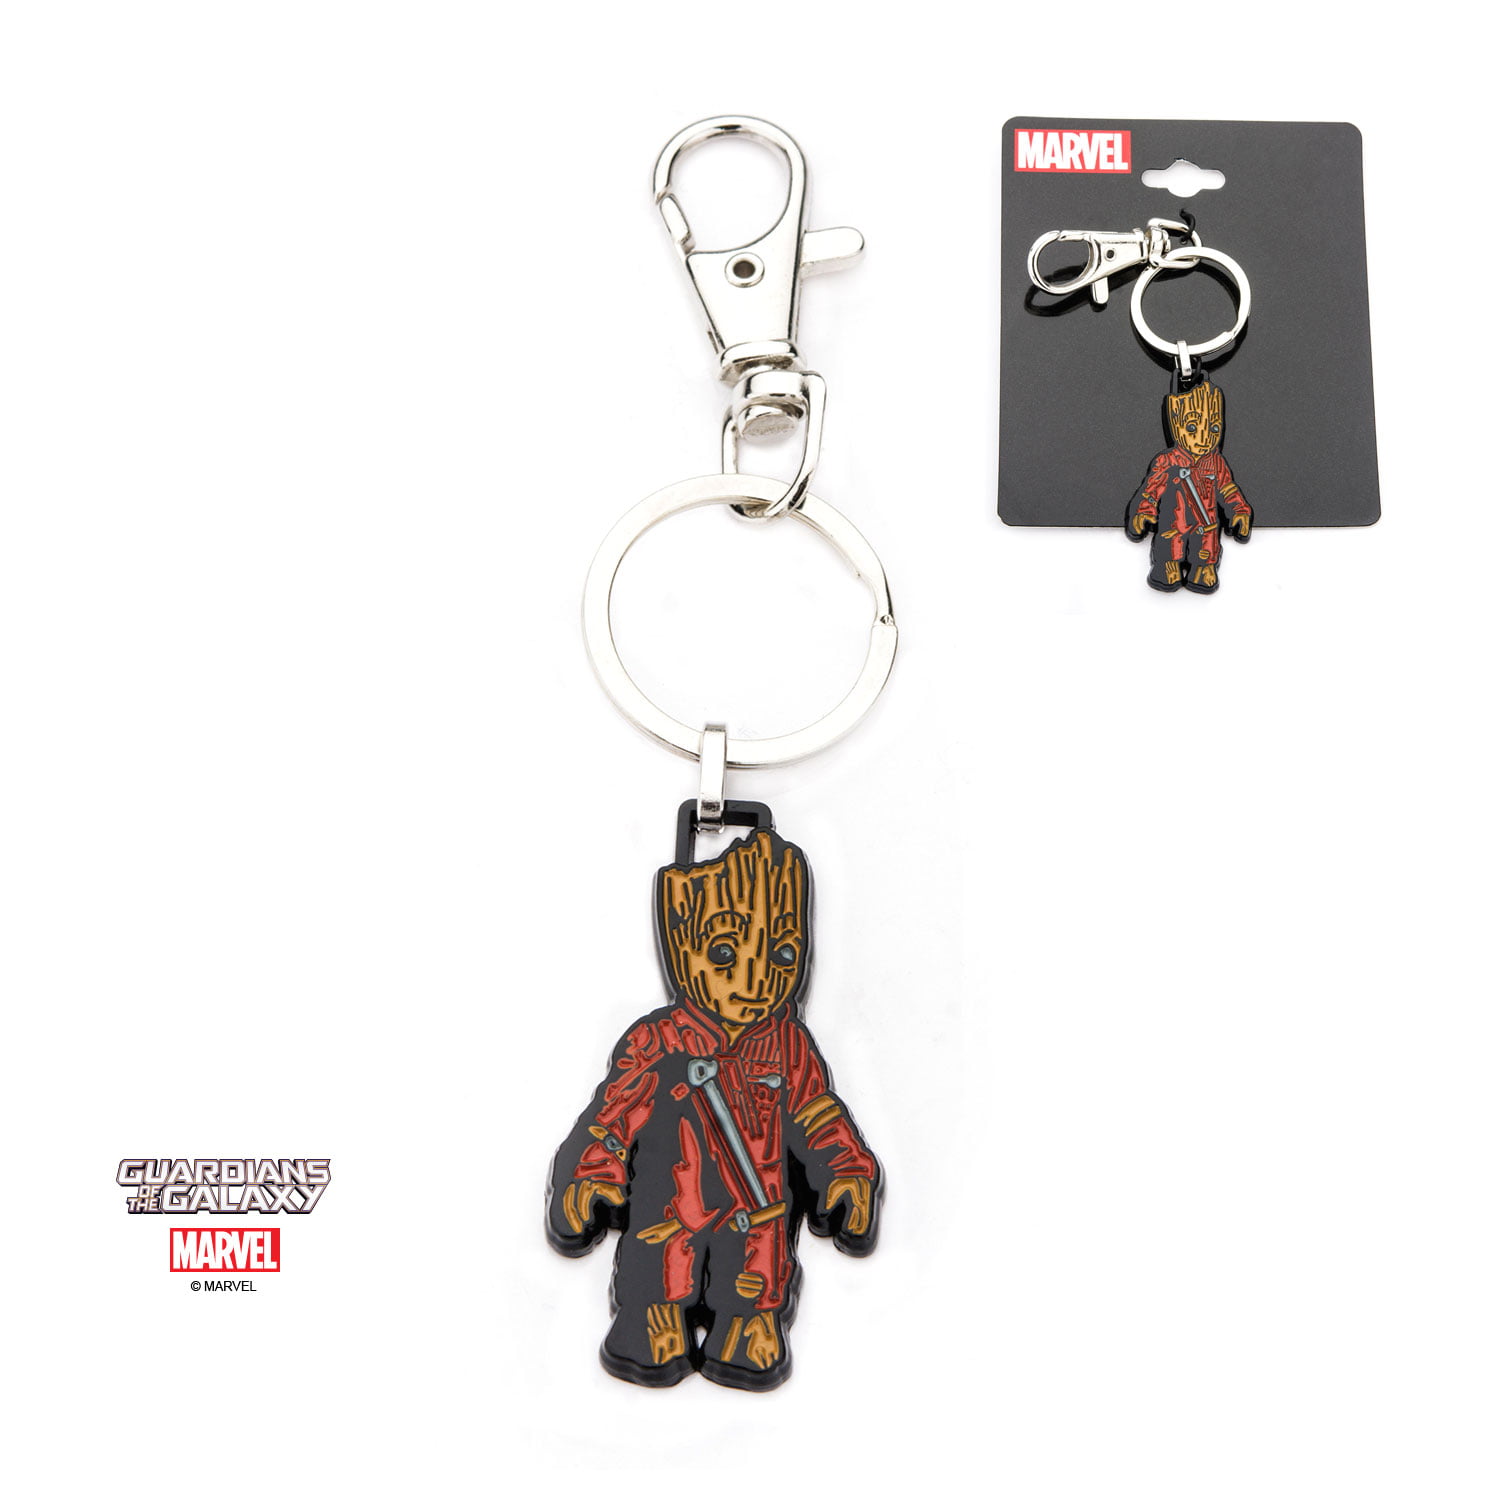 Marvel Avengers Guardians of the Galaxy Groot Alloy Keychain Key Chains Keyring 